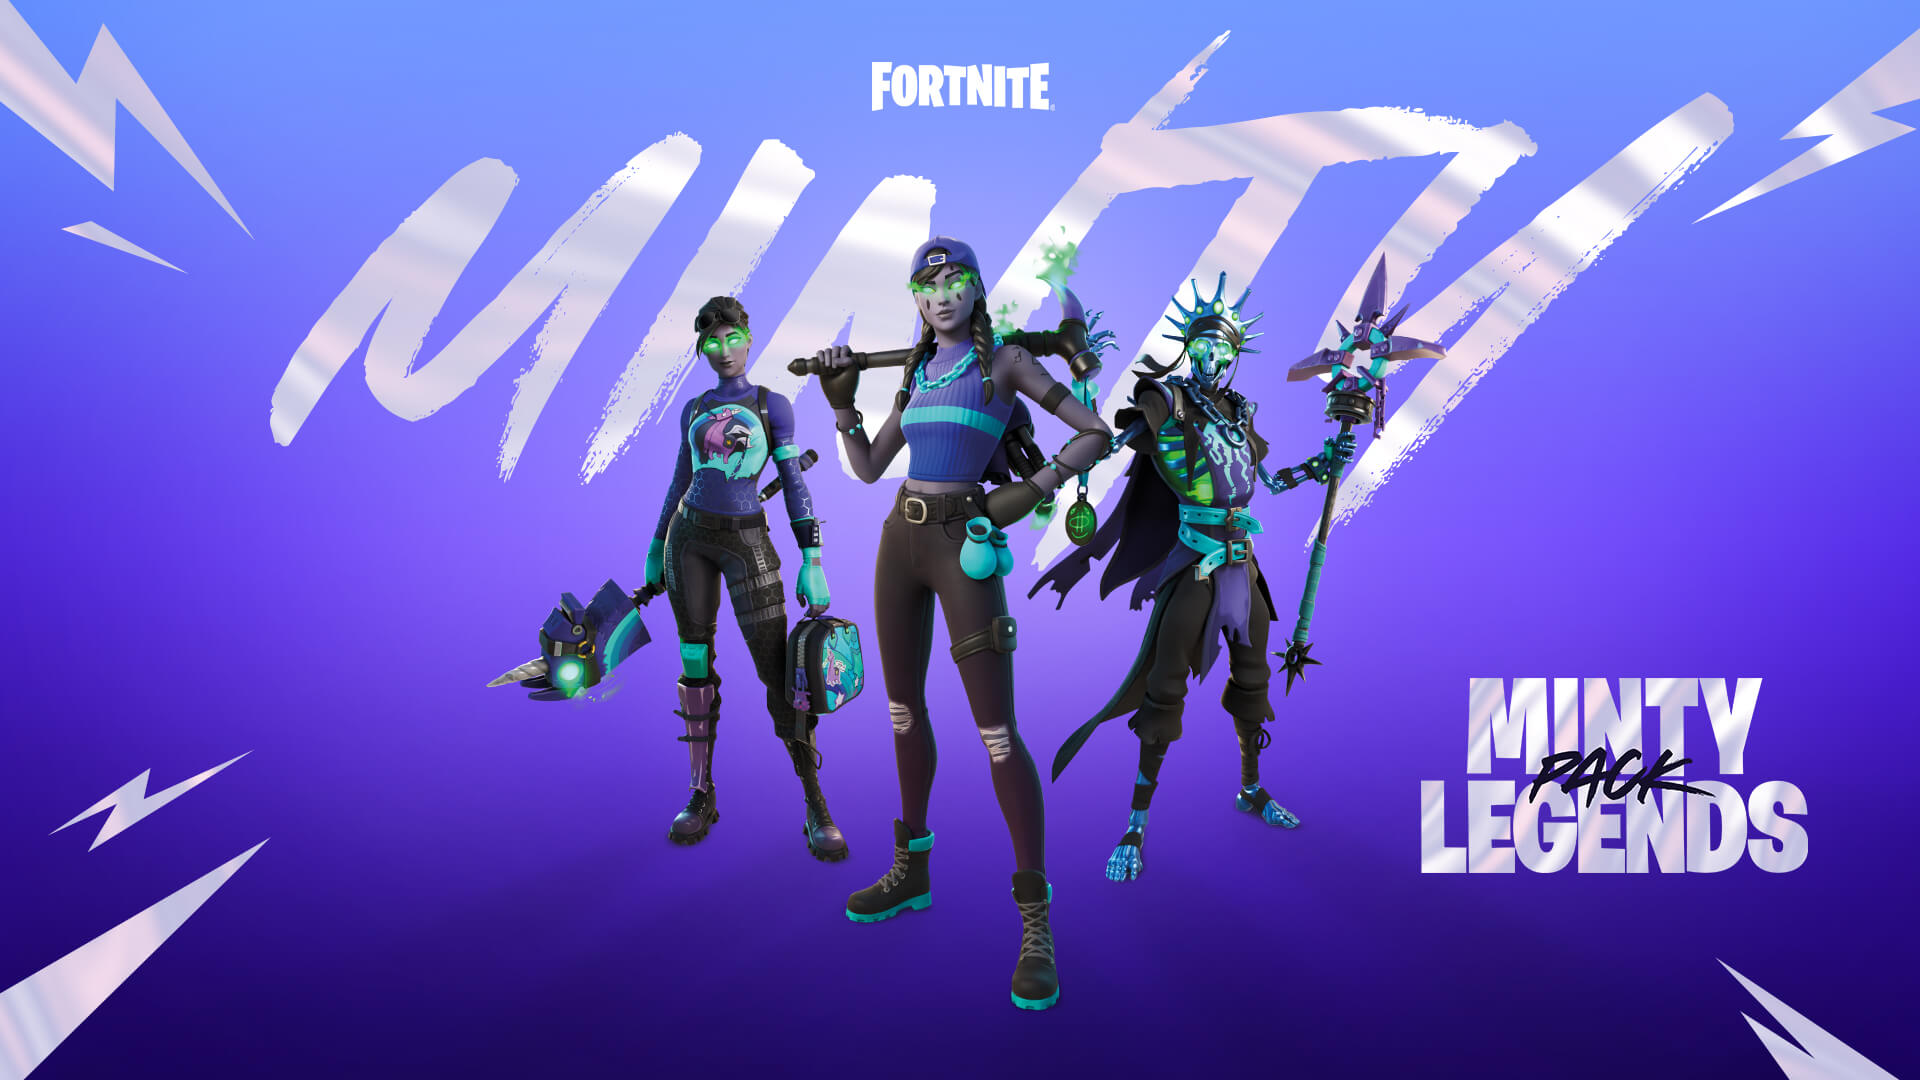 Ten Minty New Items Arrive November 2021 in Fortnite with the Minty Legends Pack